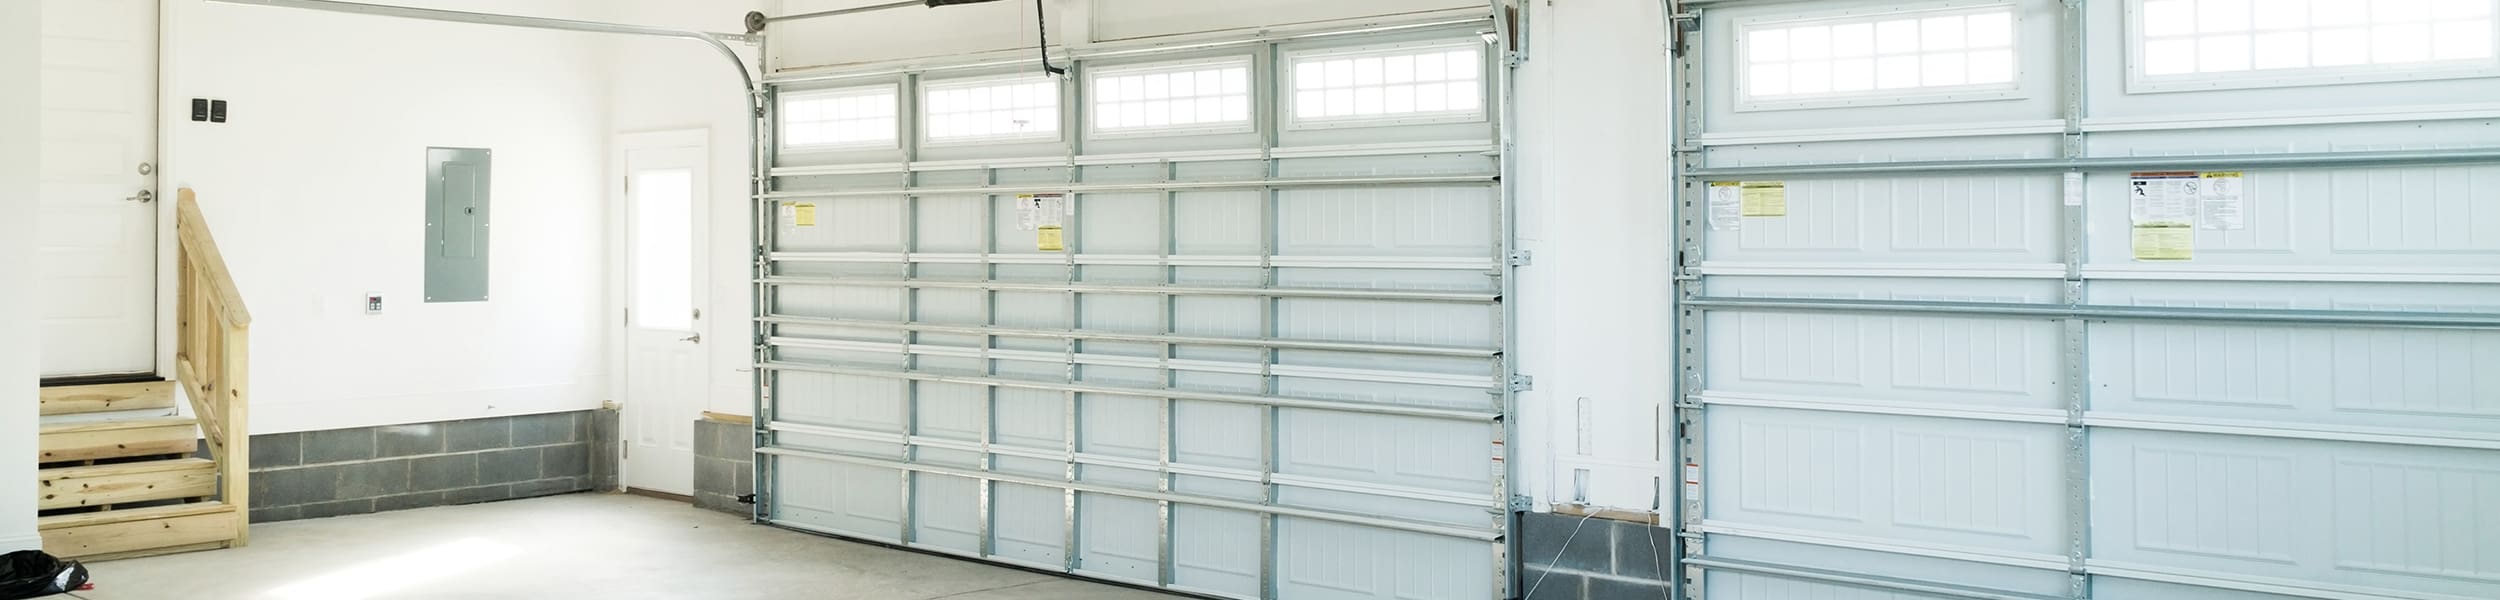 Aurora Material Solutions offers rigid PVC compounds, like AuroraTec™, & cellular foam products for garage, wall, & other indoor/outdoor applications.